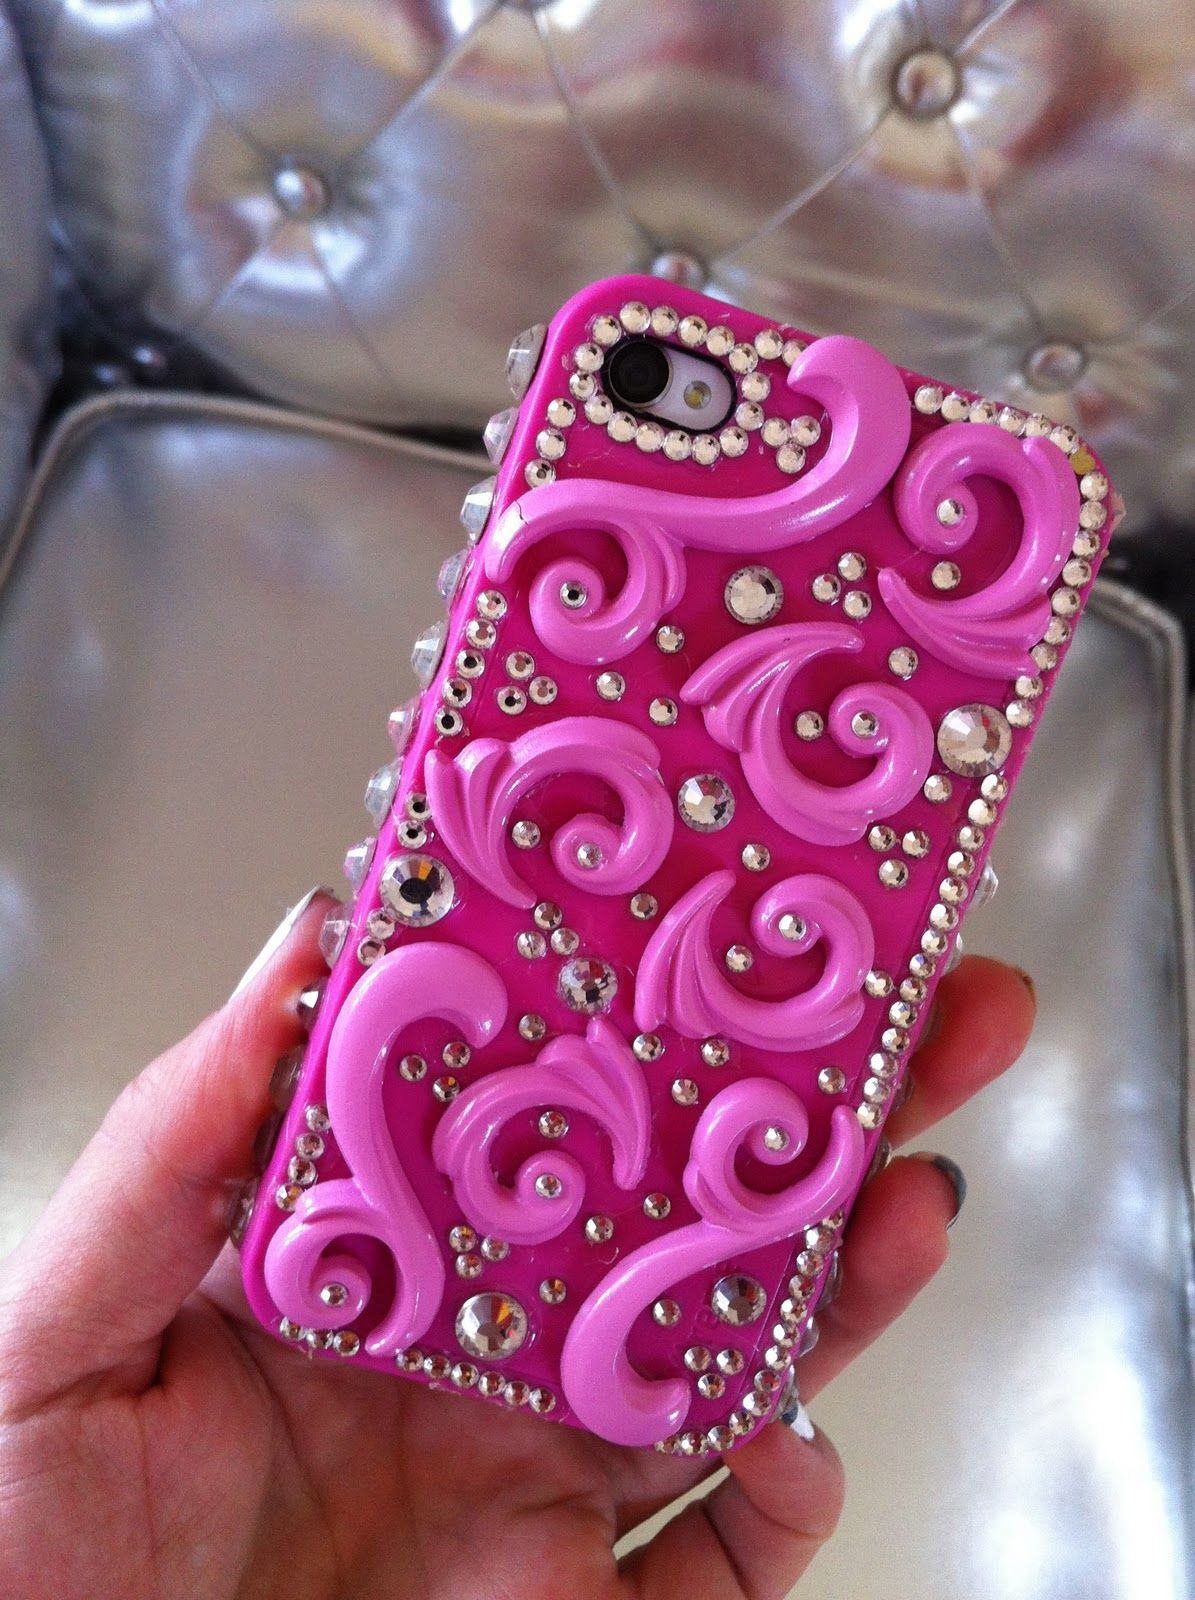 Kandeeland: My sister made her phone case like this…